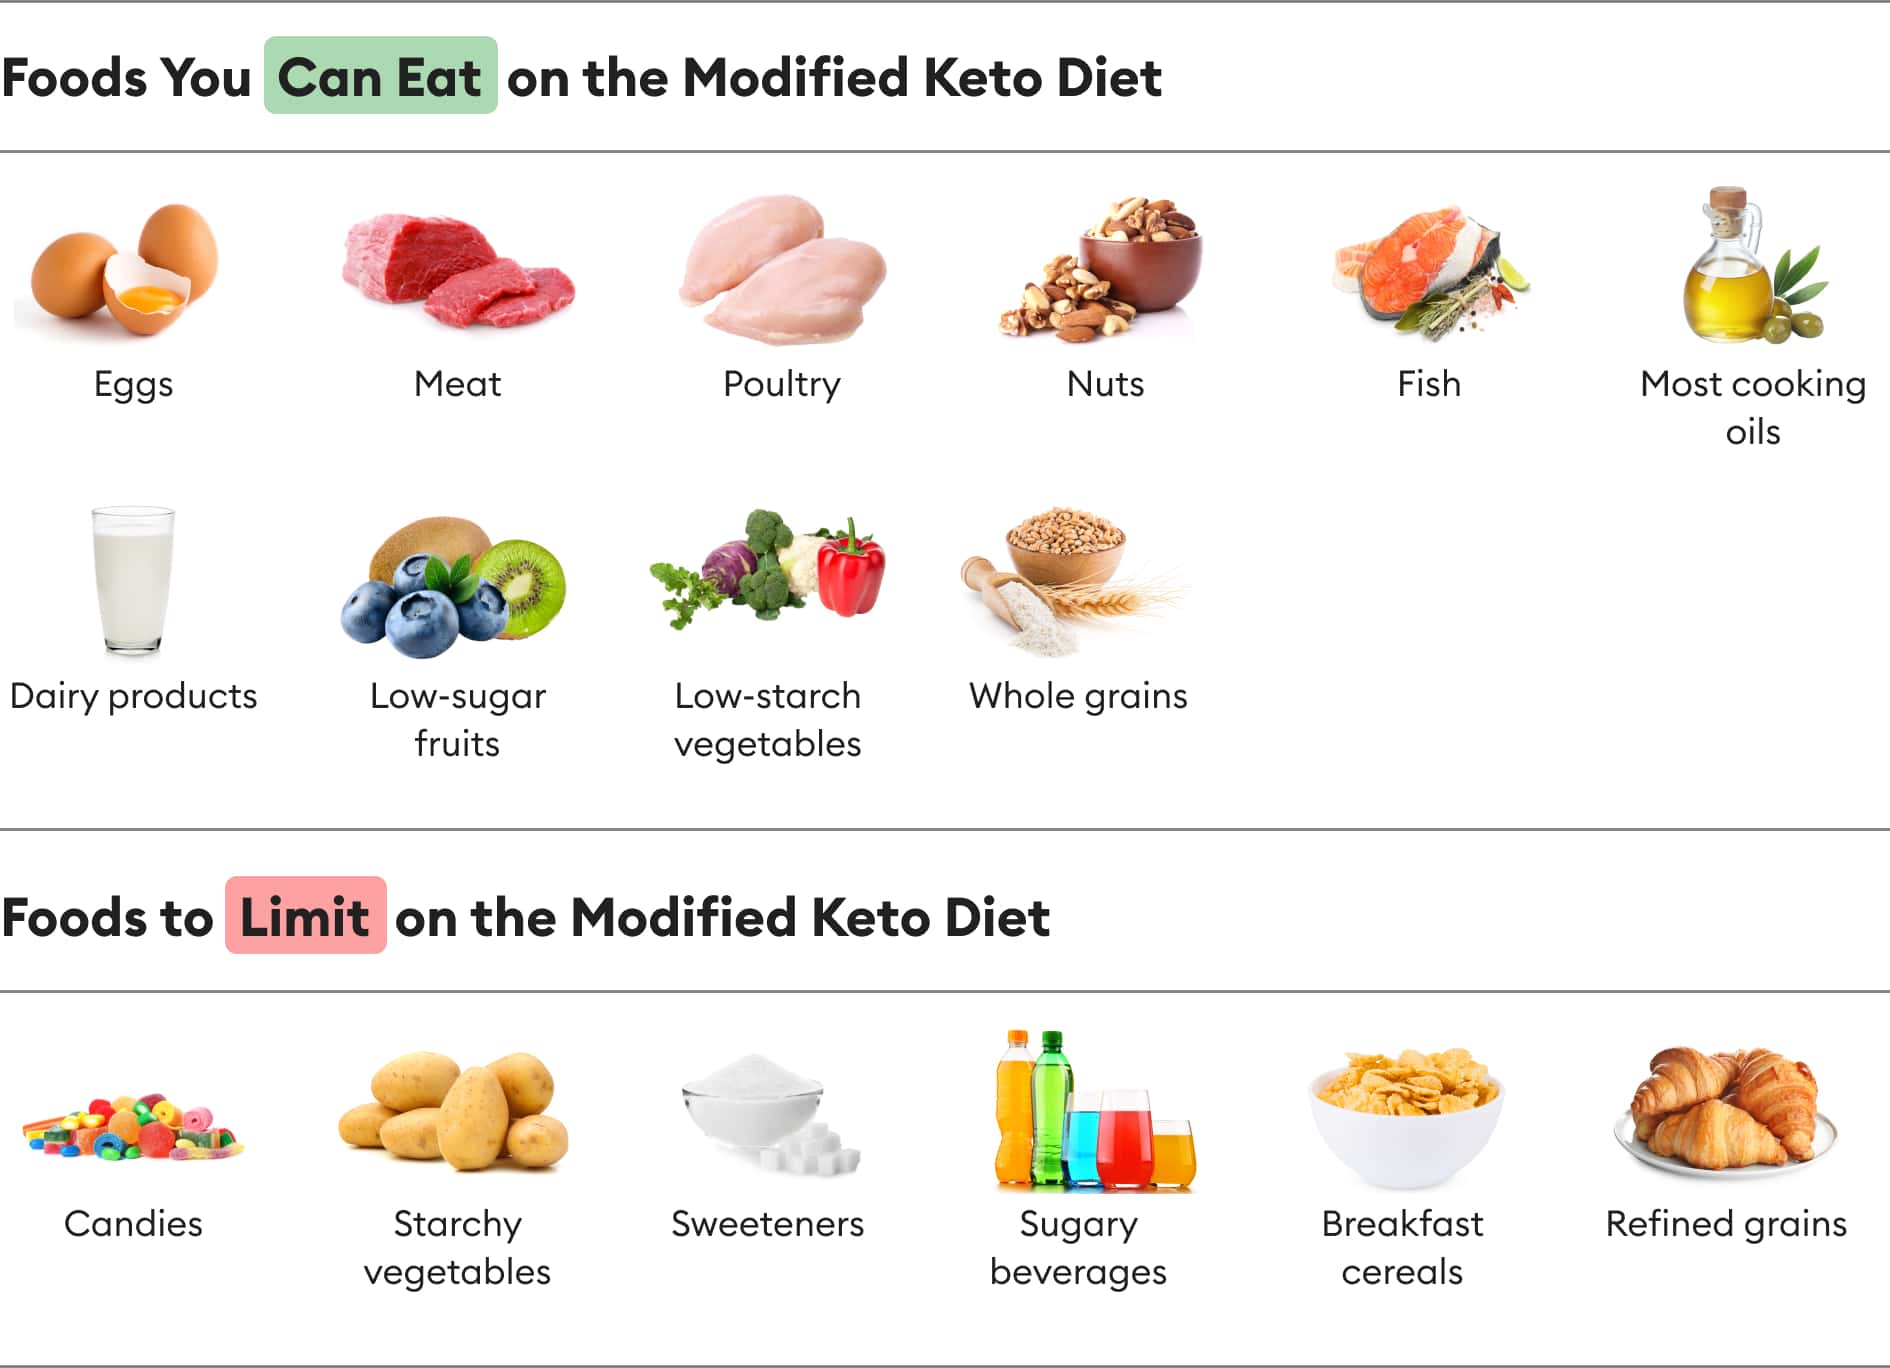 Modified Keto Diet: What Is It and How Does It Compare to Keto? - Welltech